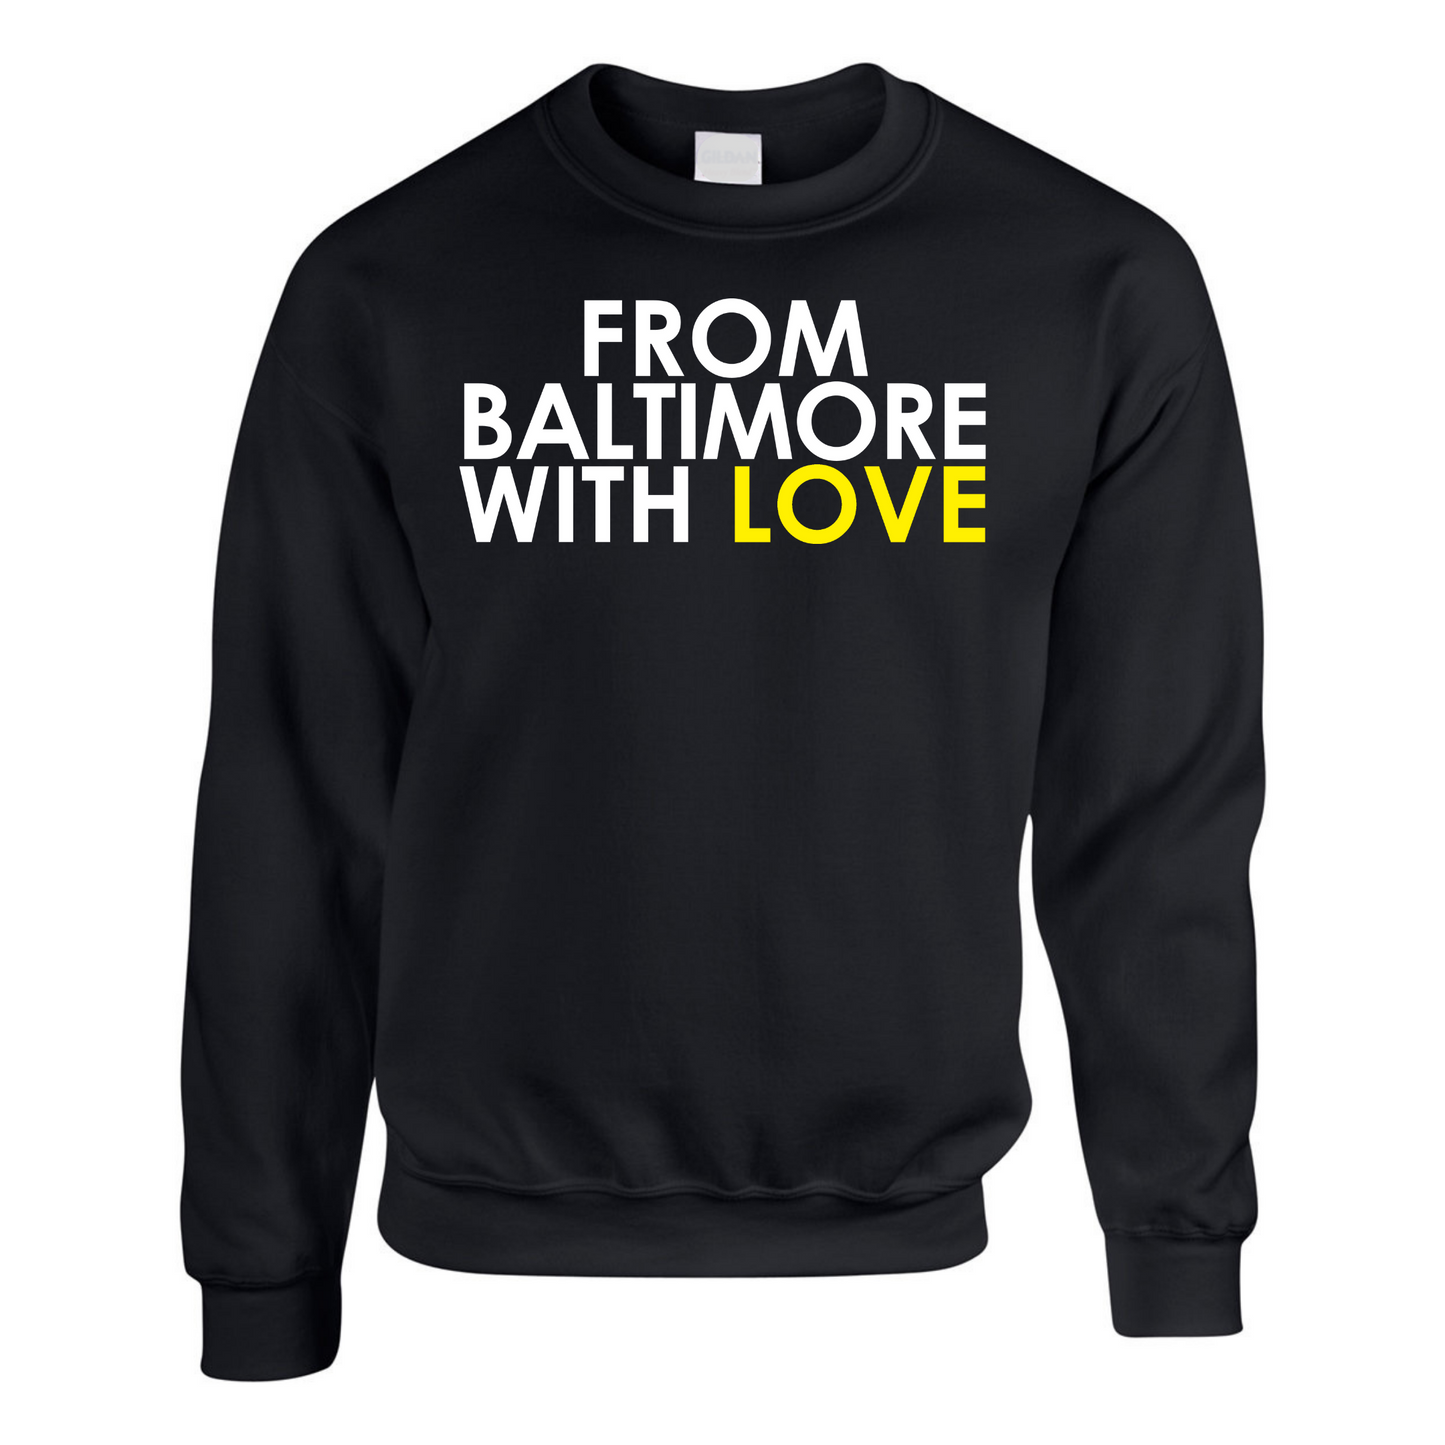 FROM BALTIMORE WITH LOVE CREWNECK